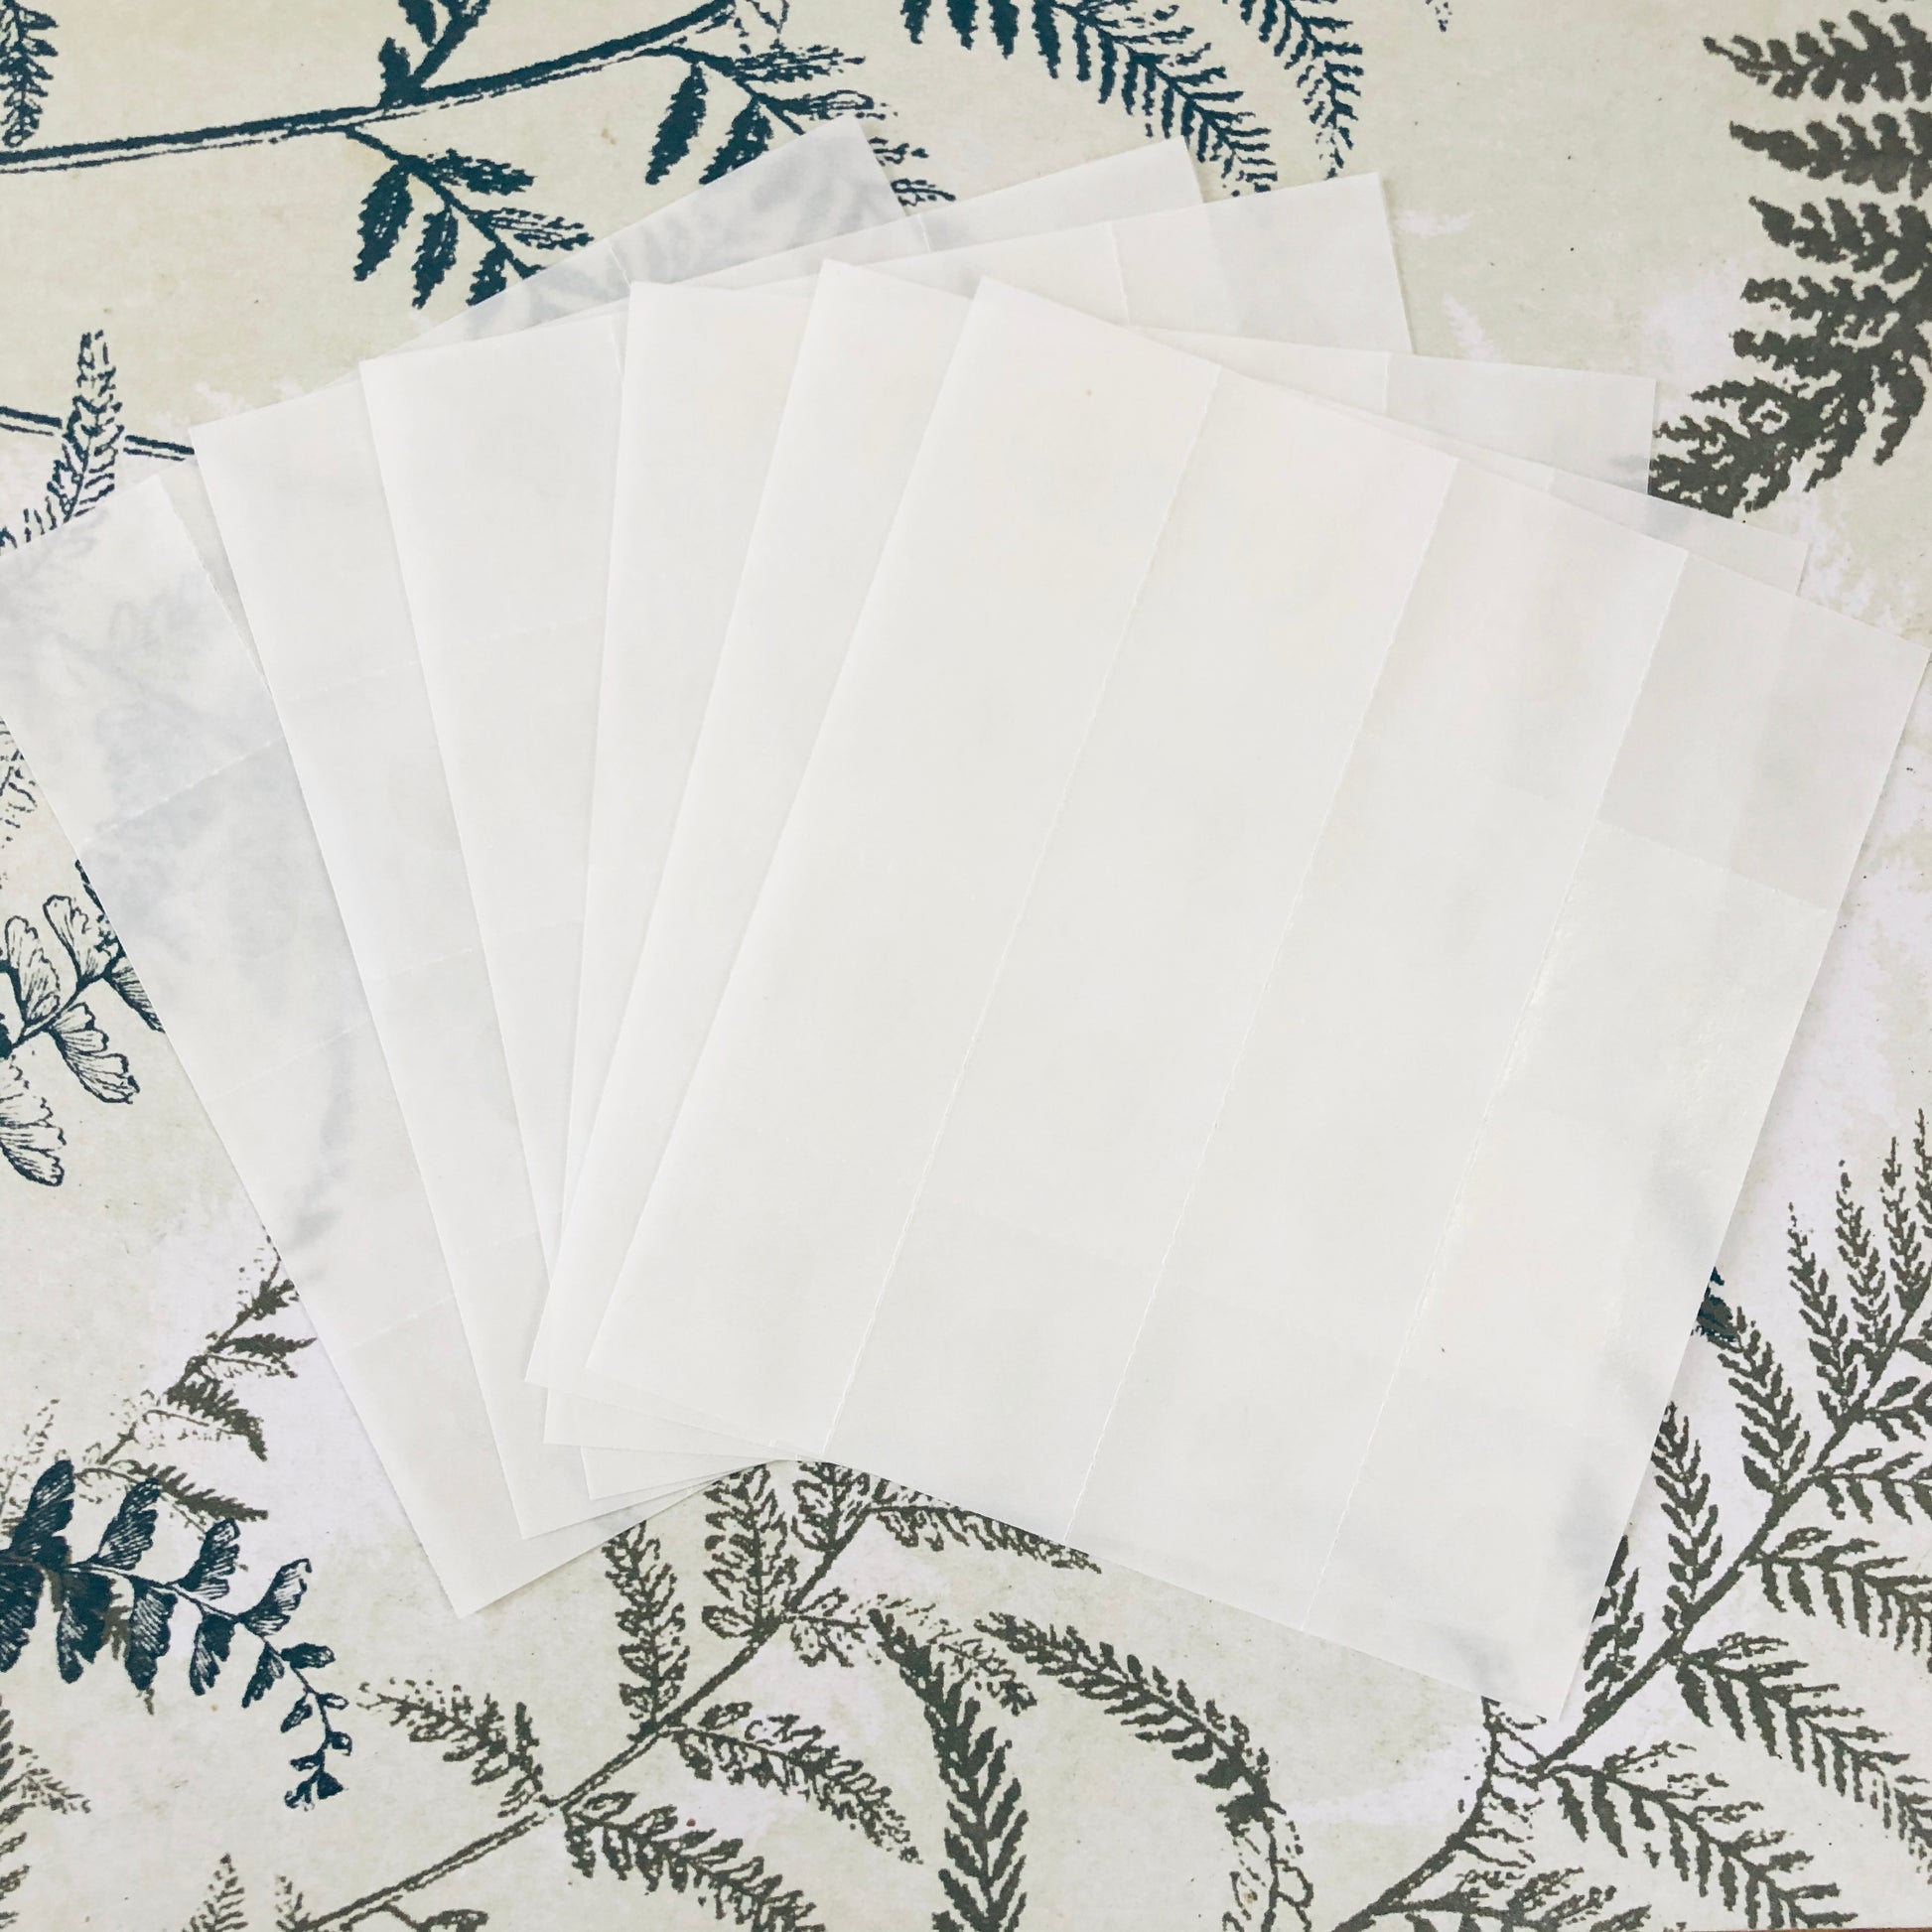 6 sheets with 16 adhesive sticky dots on each sheet. Perfect for sticking down our scented and fragrance-free drawer liners.